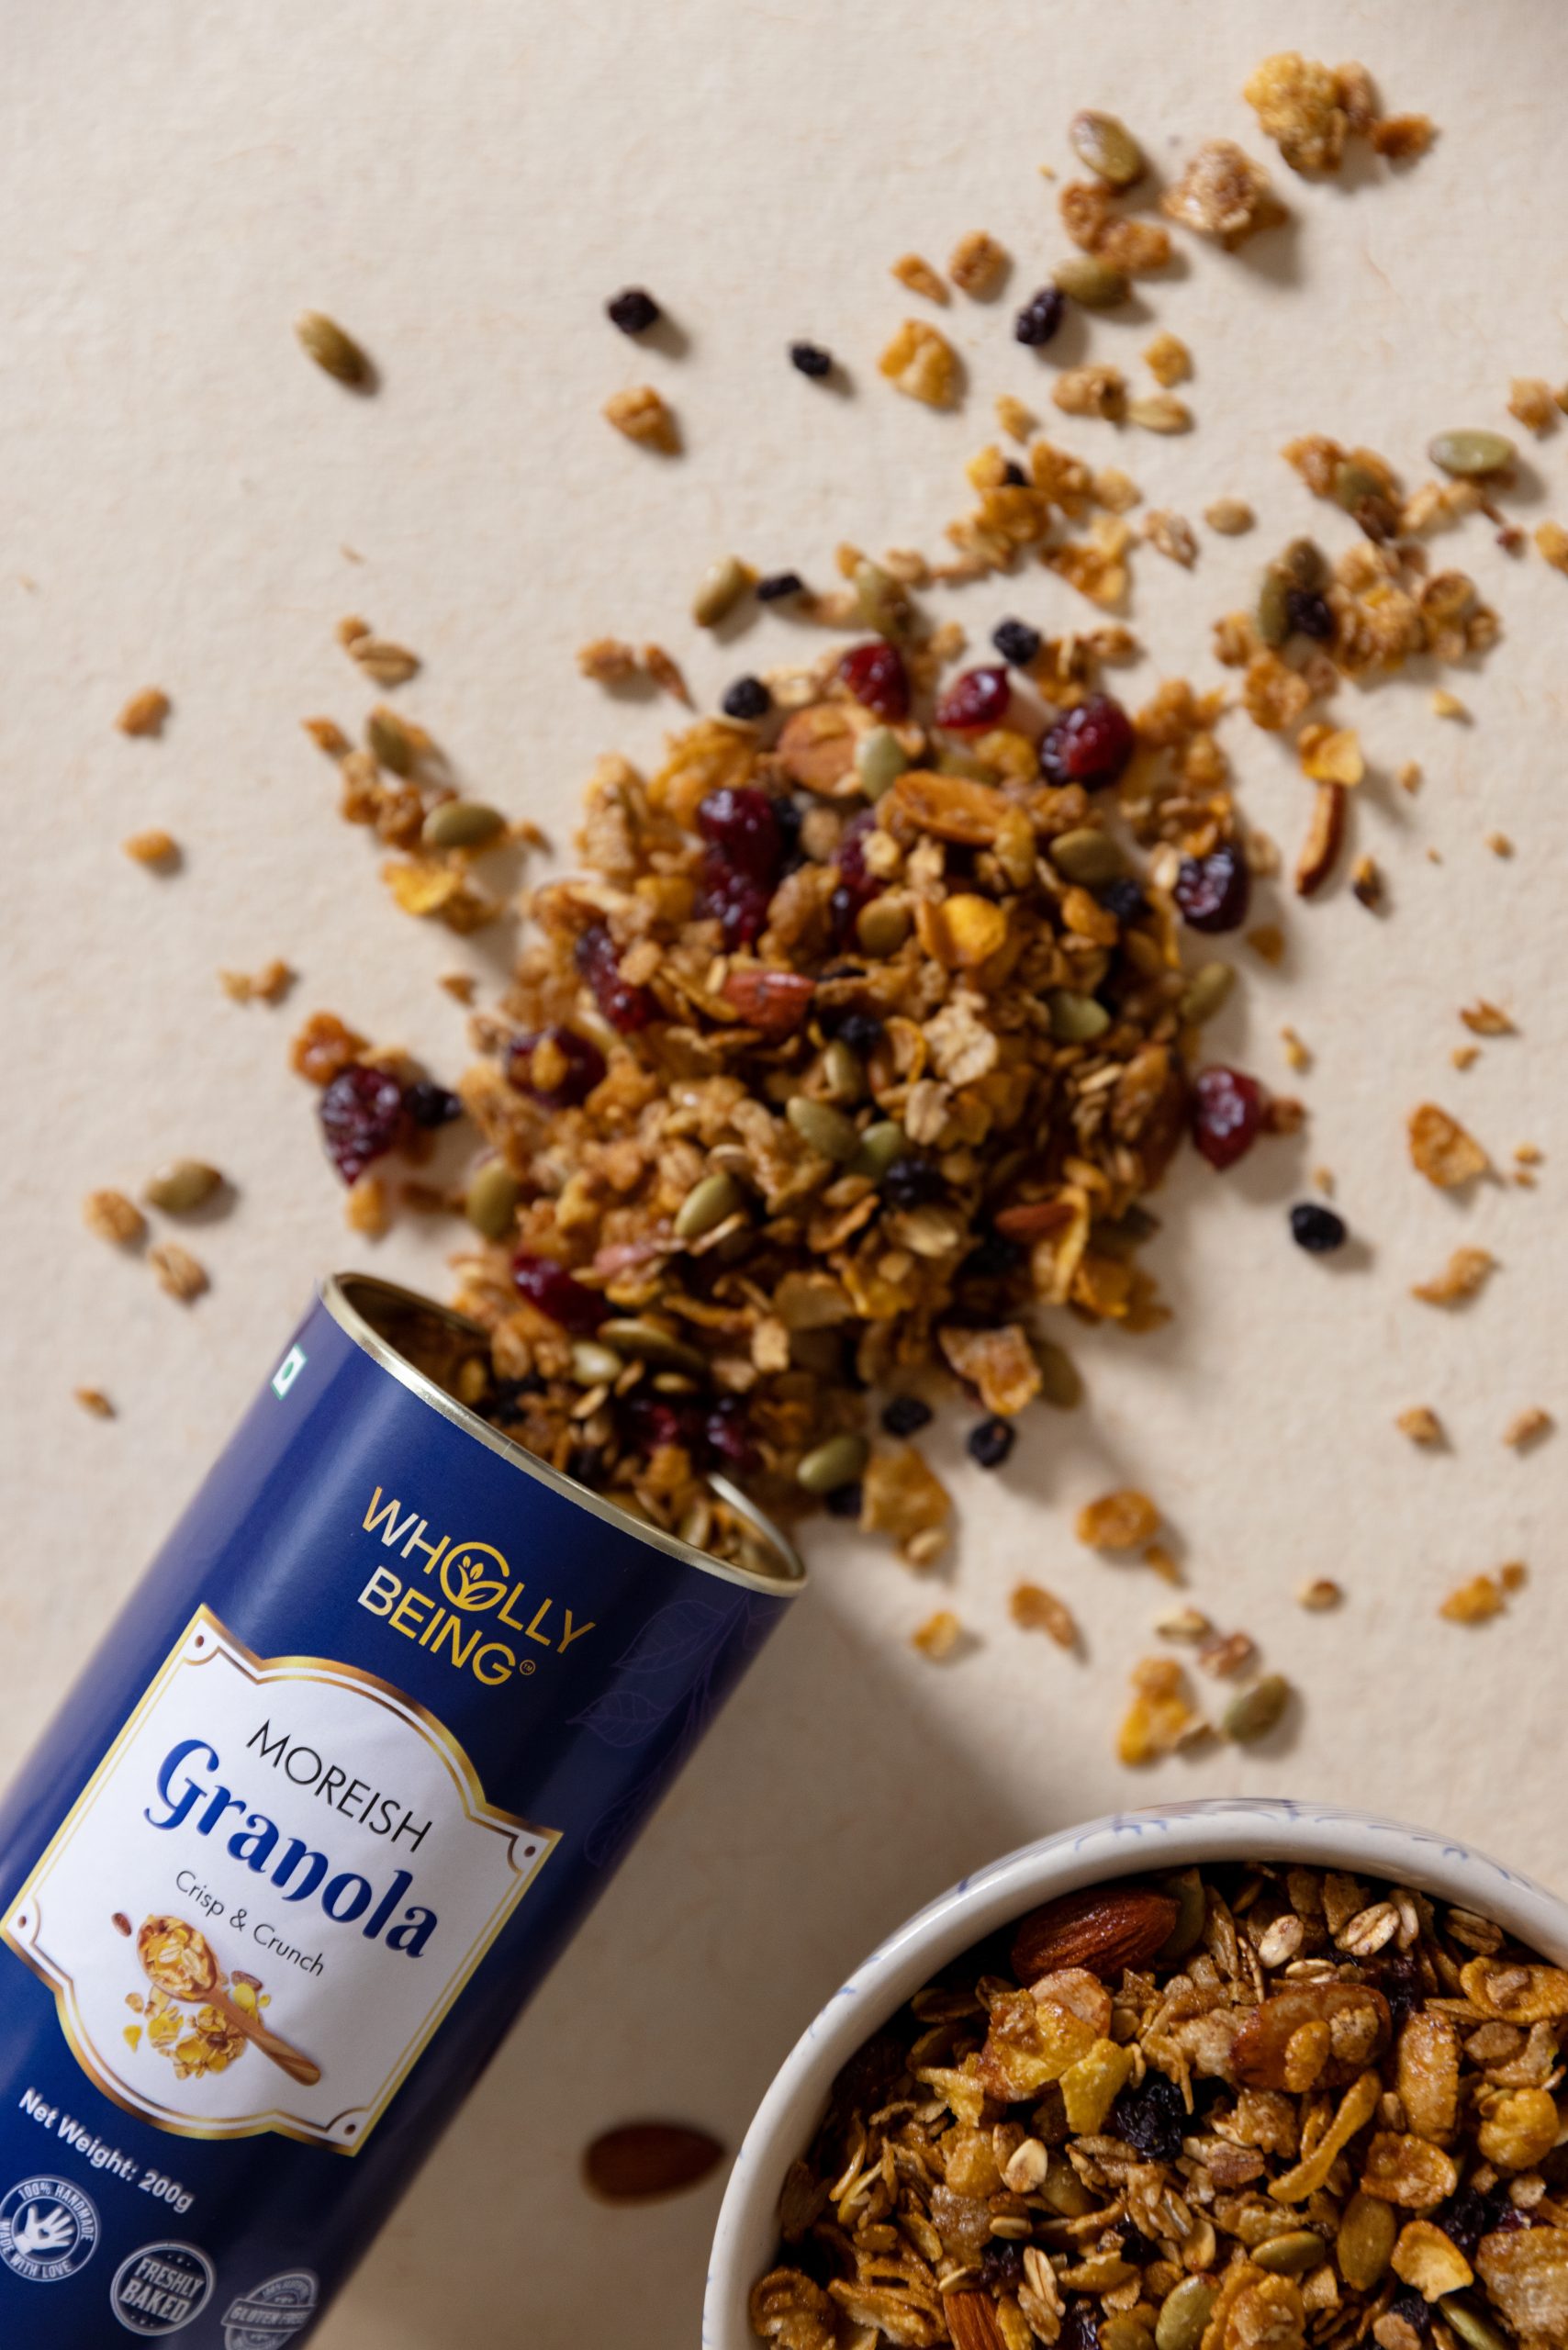 Product: Wholly Being Moreish Granola Crisp & Crunch